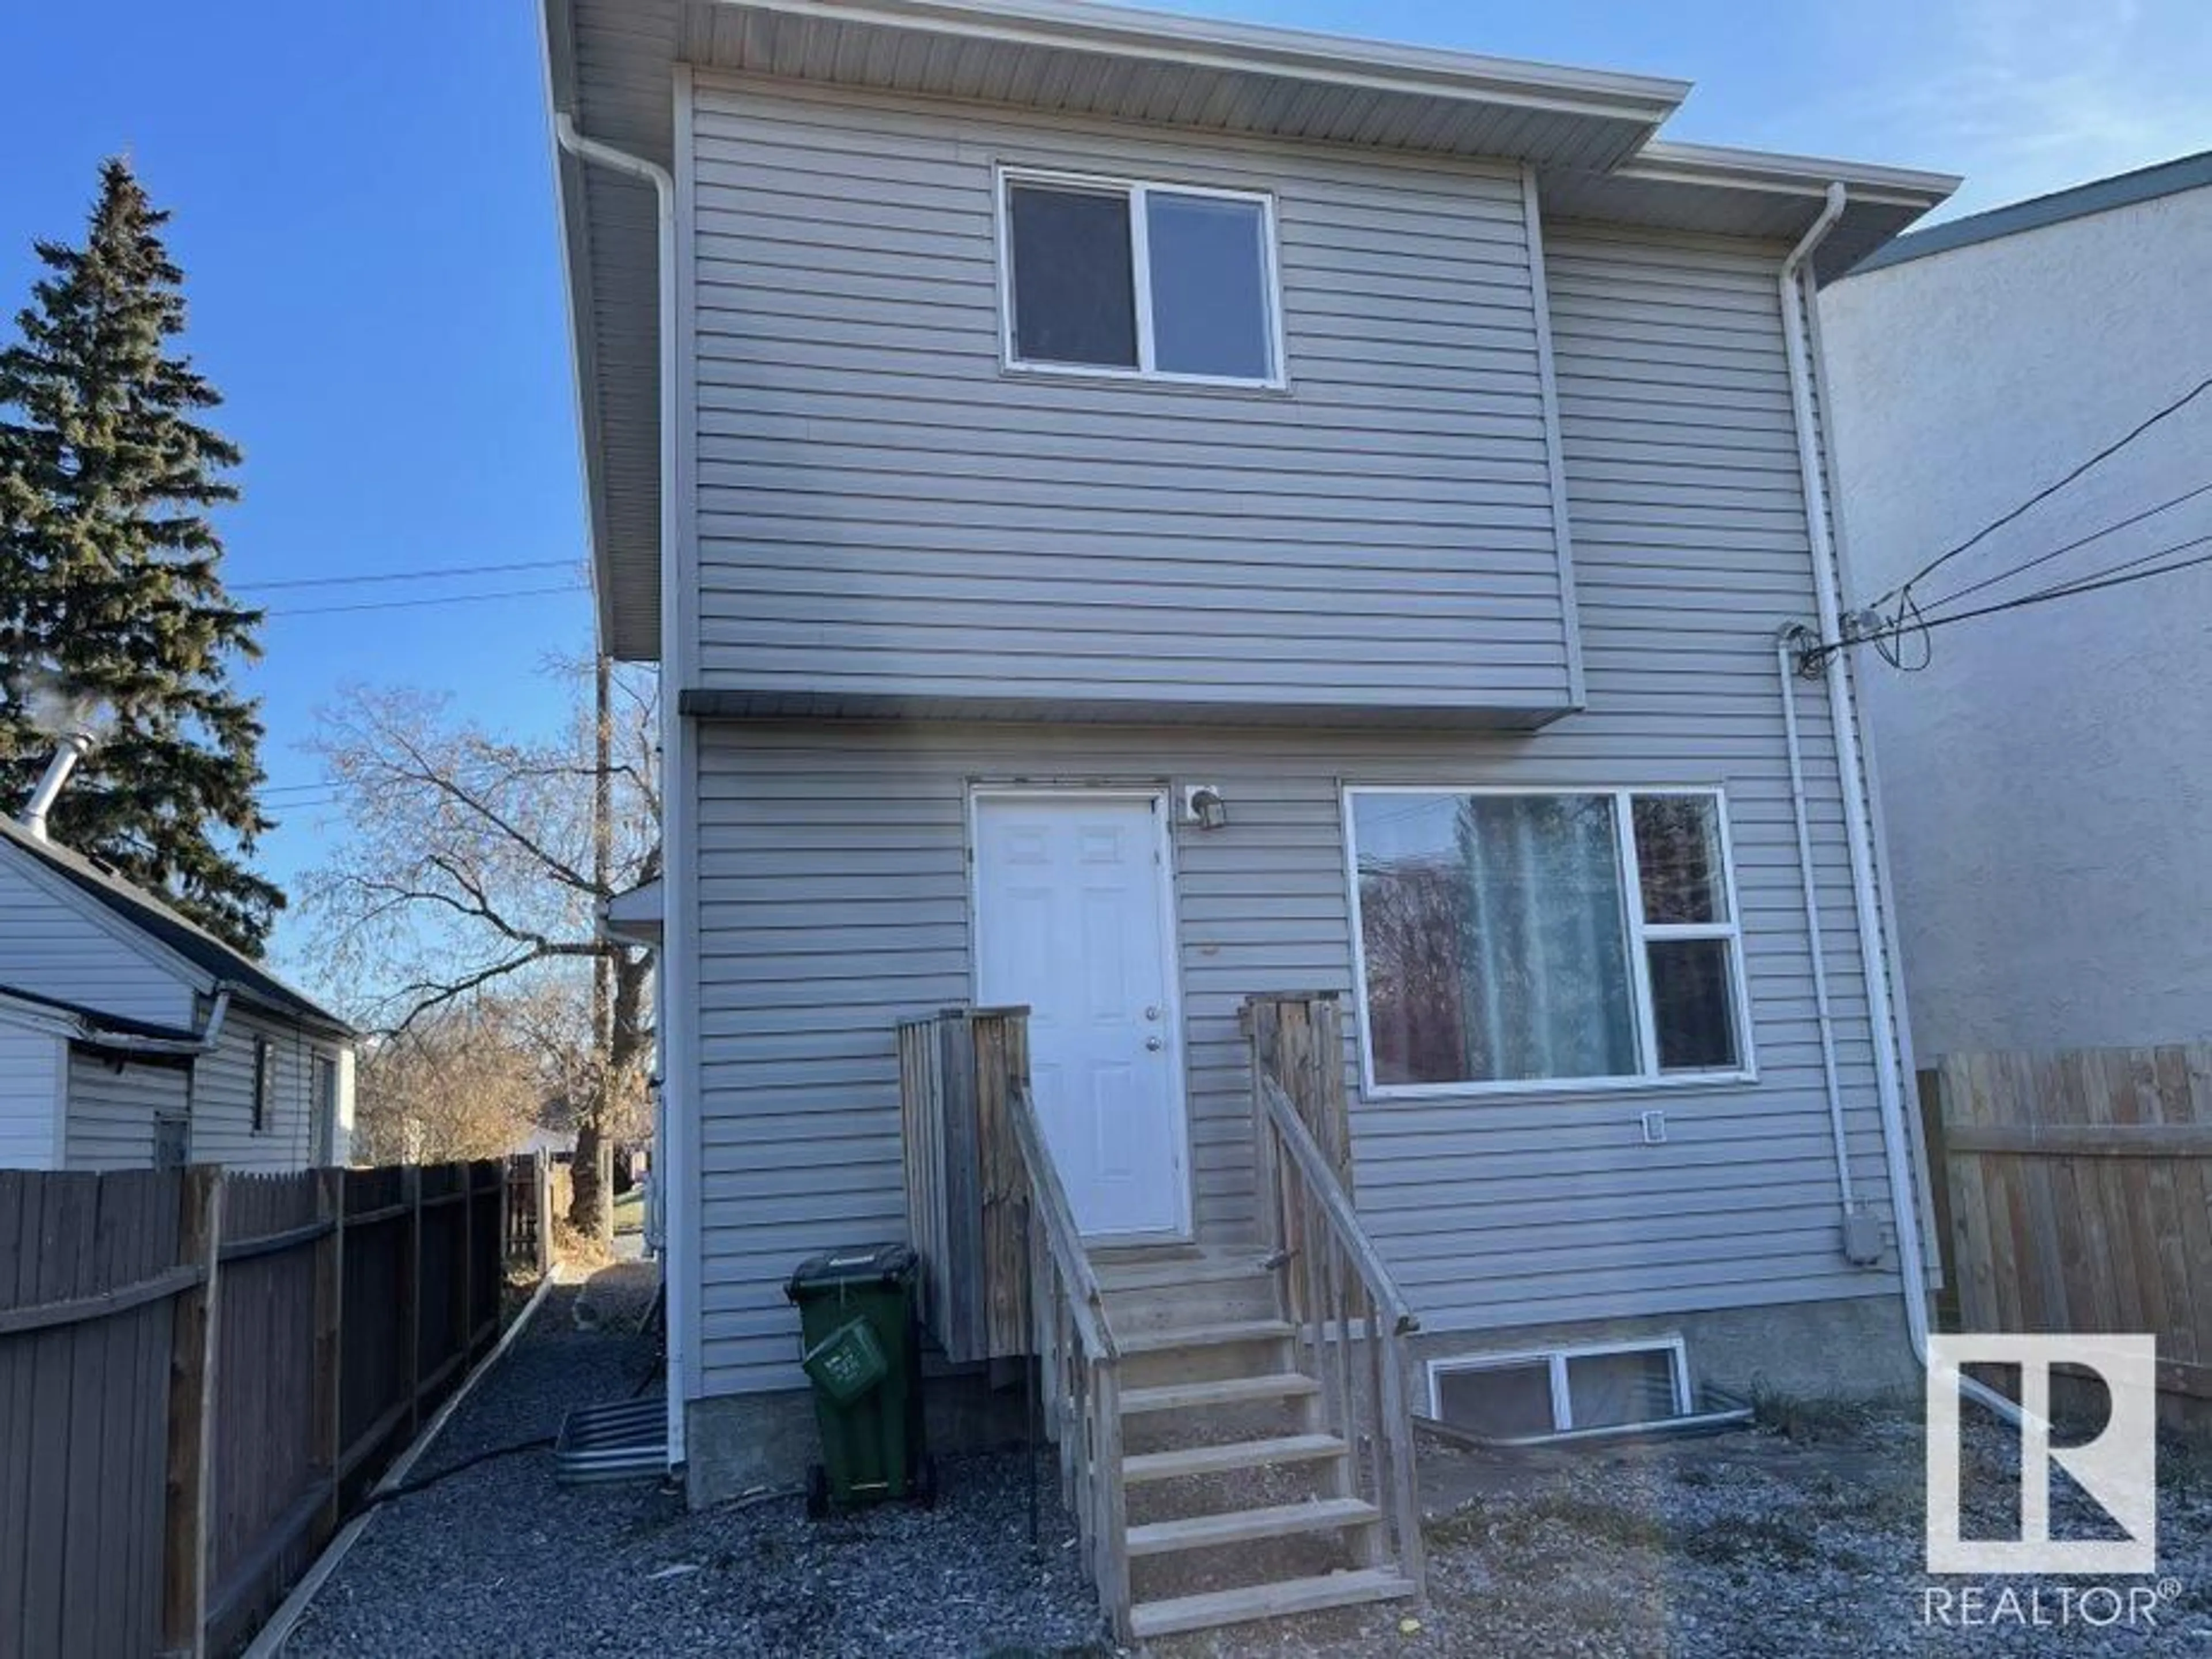 A pic from exterior of the house or condo for 12042 66 ST NW NW, Edmonton Alberta T5B1J6